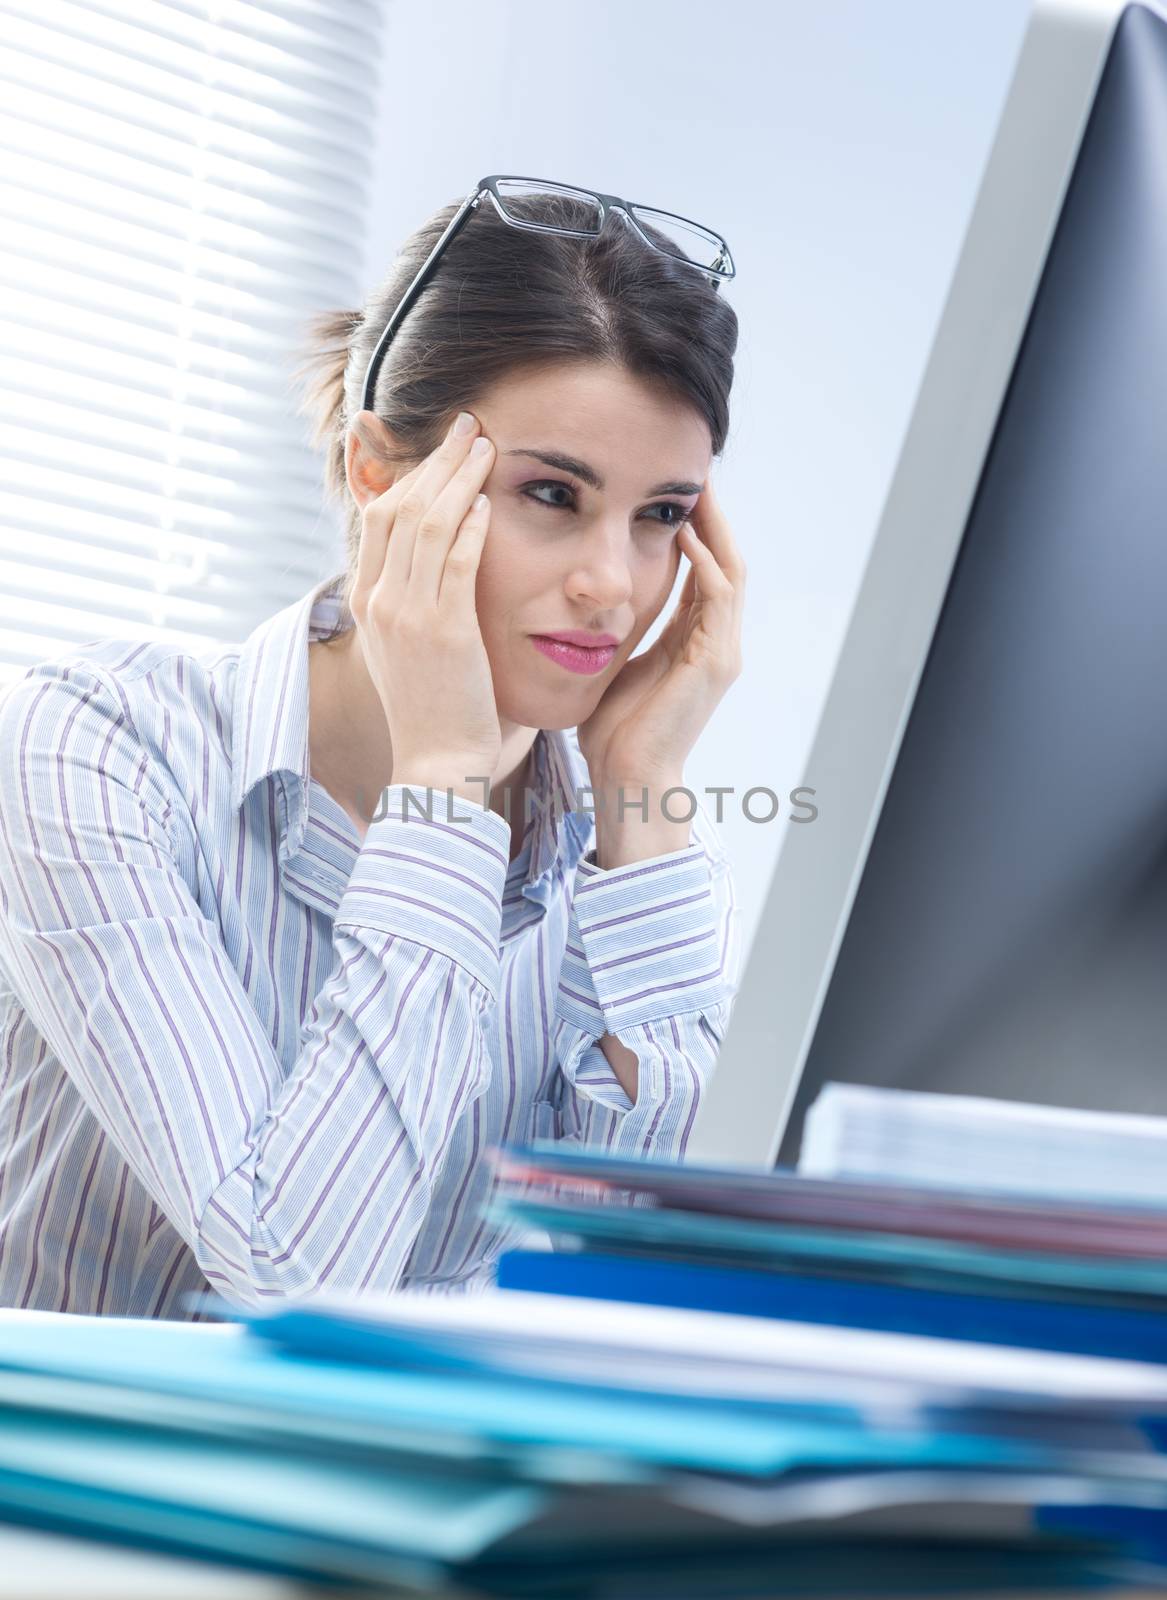 Tired businesswoman with headache touching her temples at desk.